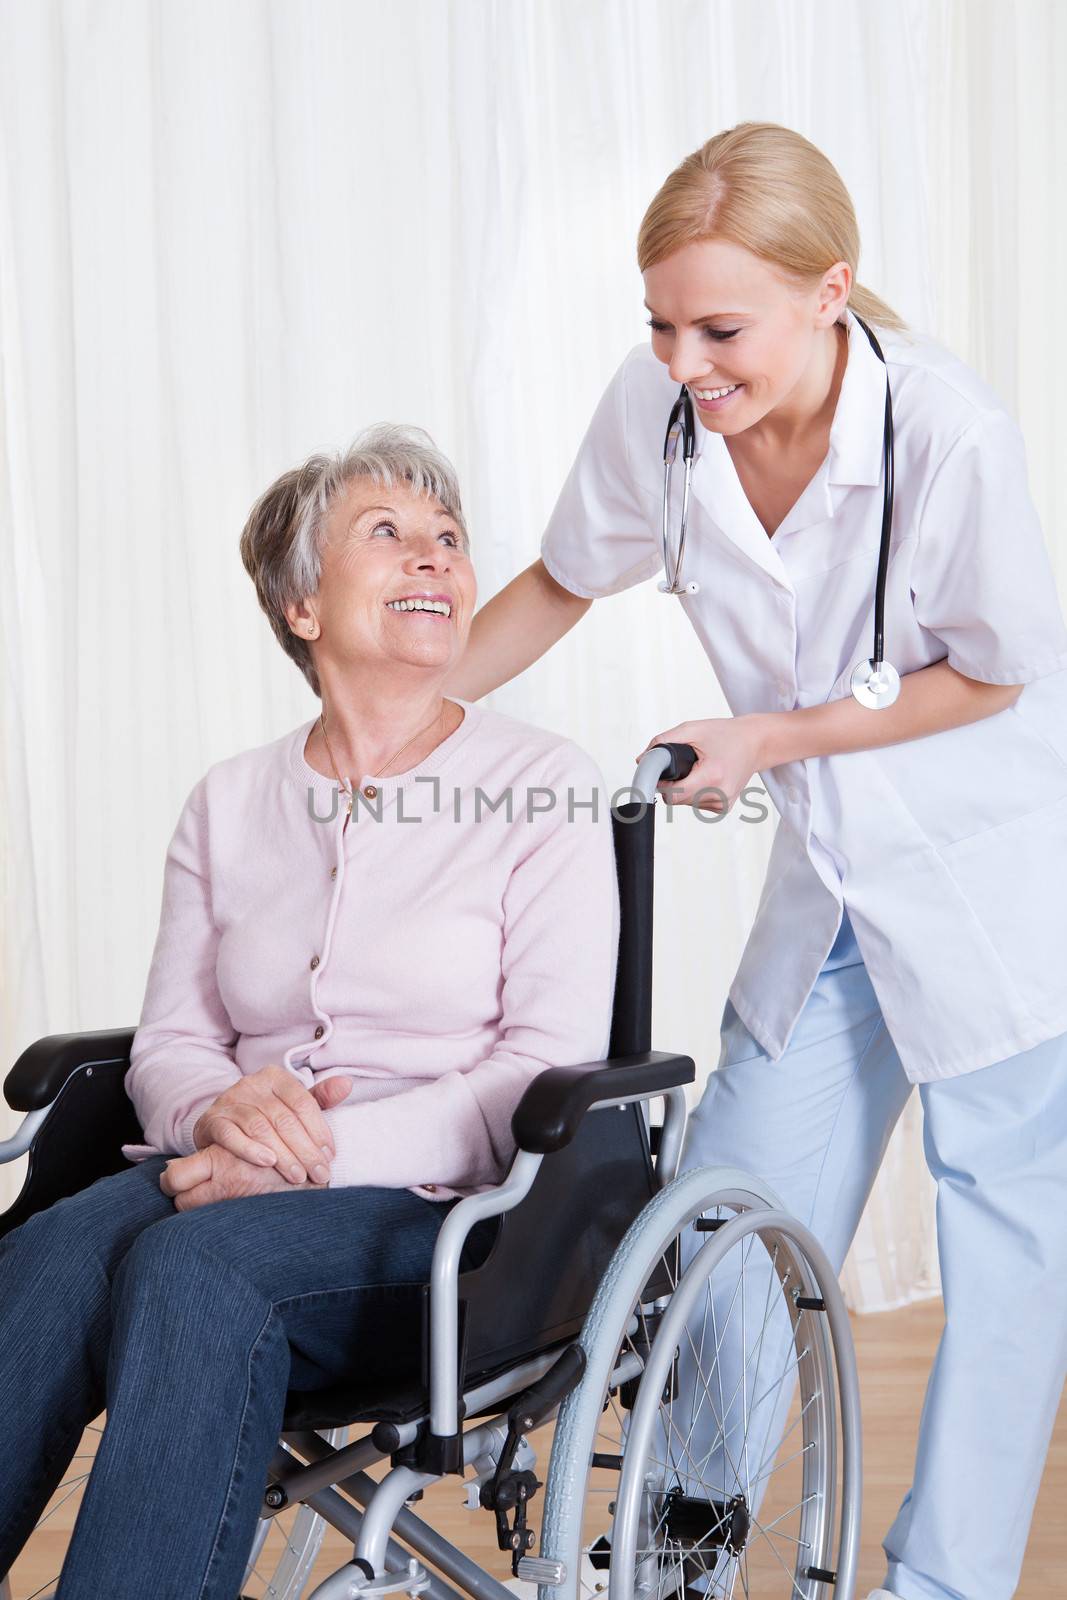 Caring Doctor Helping Handicapped Senior Patient Indoors